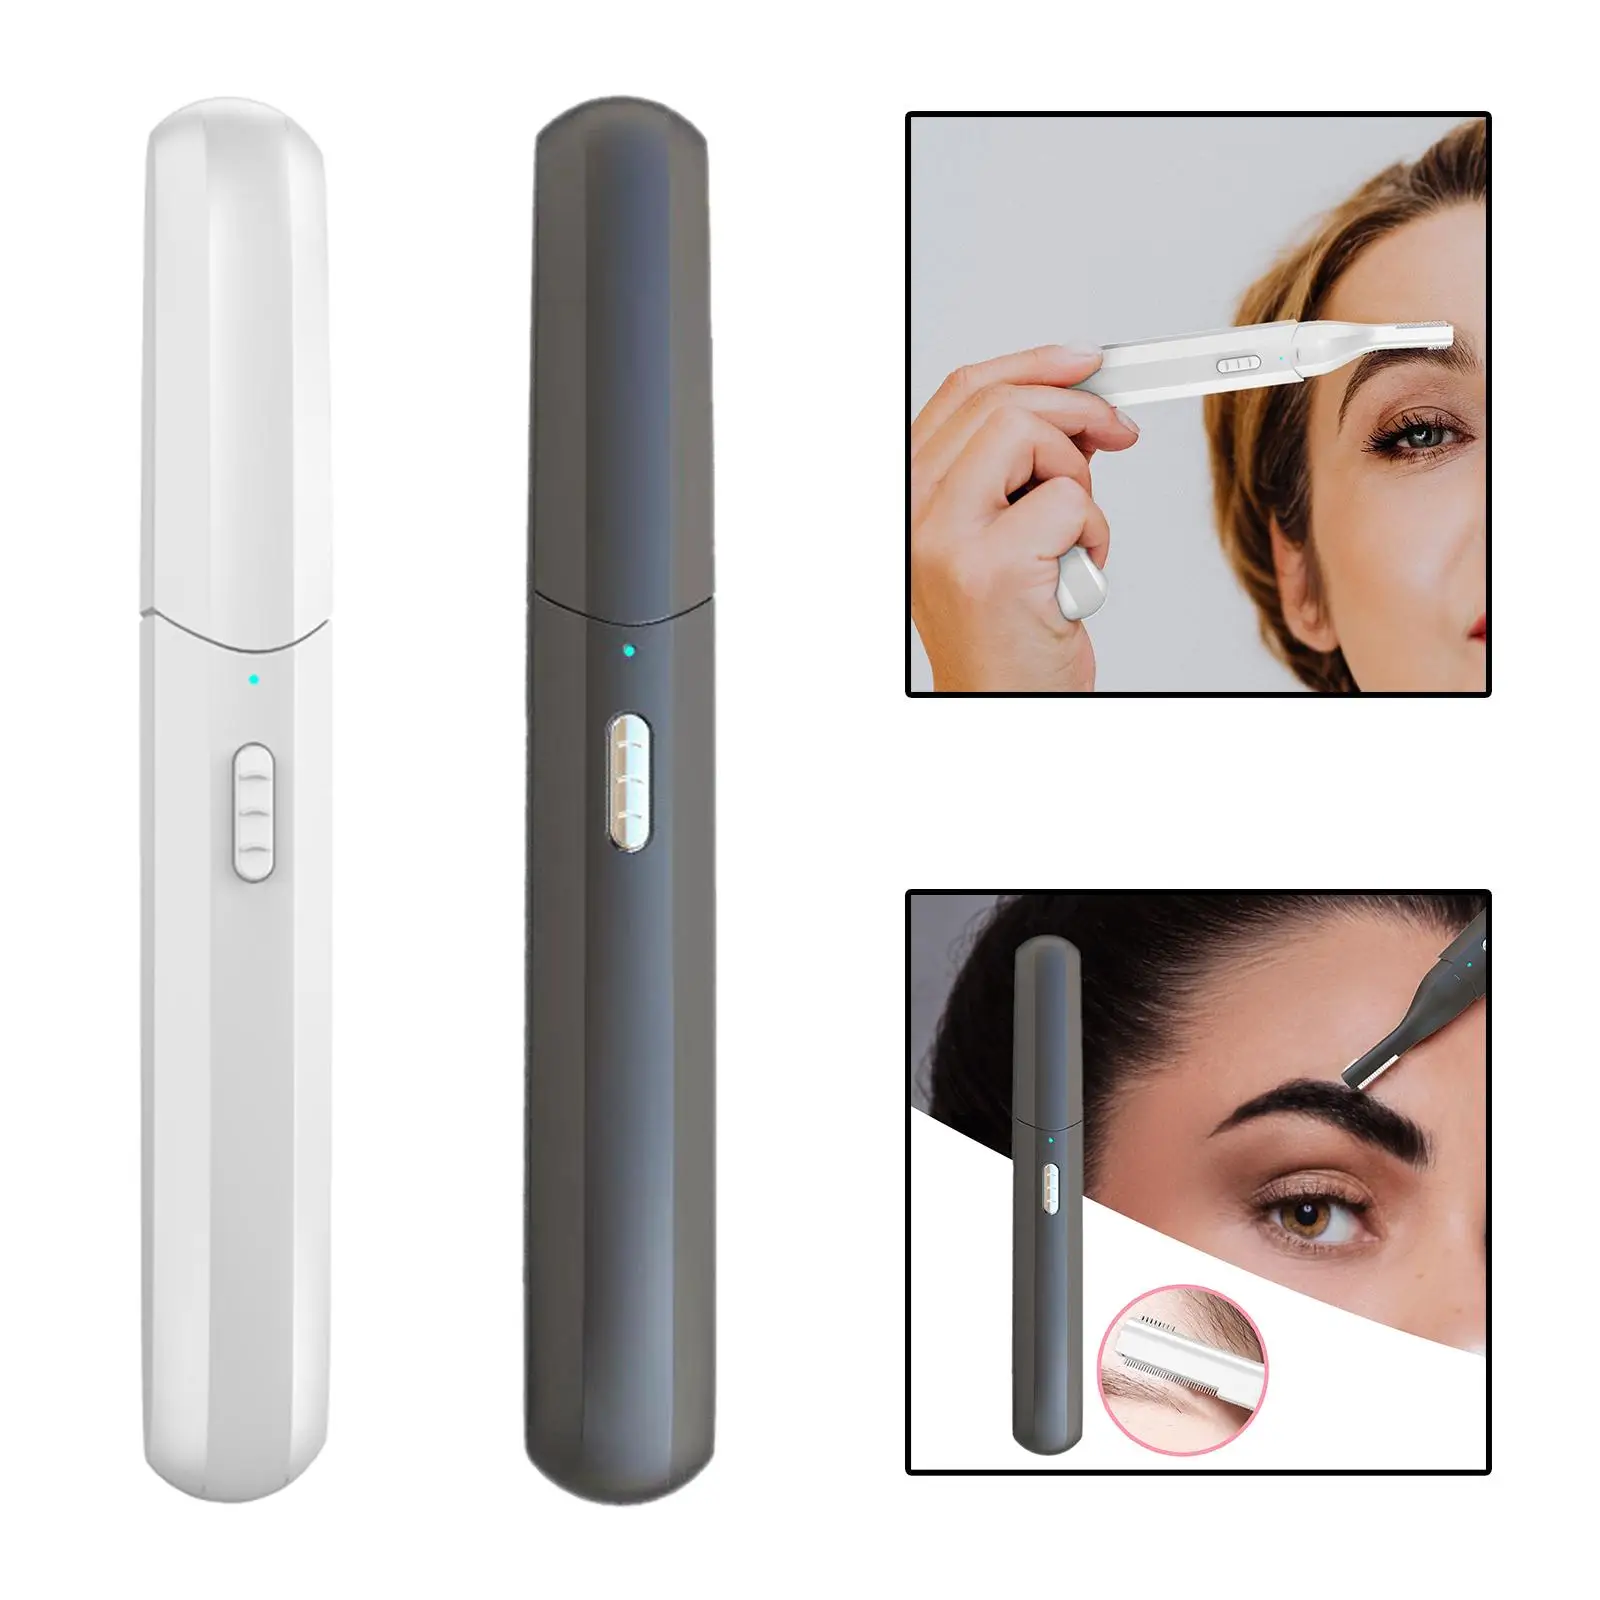 USB Charging Electric Eyebrow trimming Facial Shaving Tool Scrtachproof for Arms